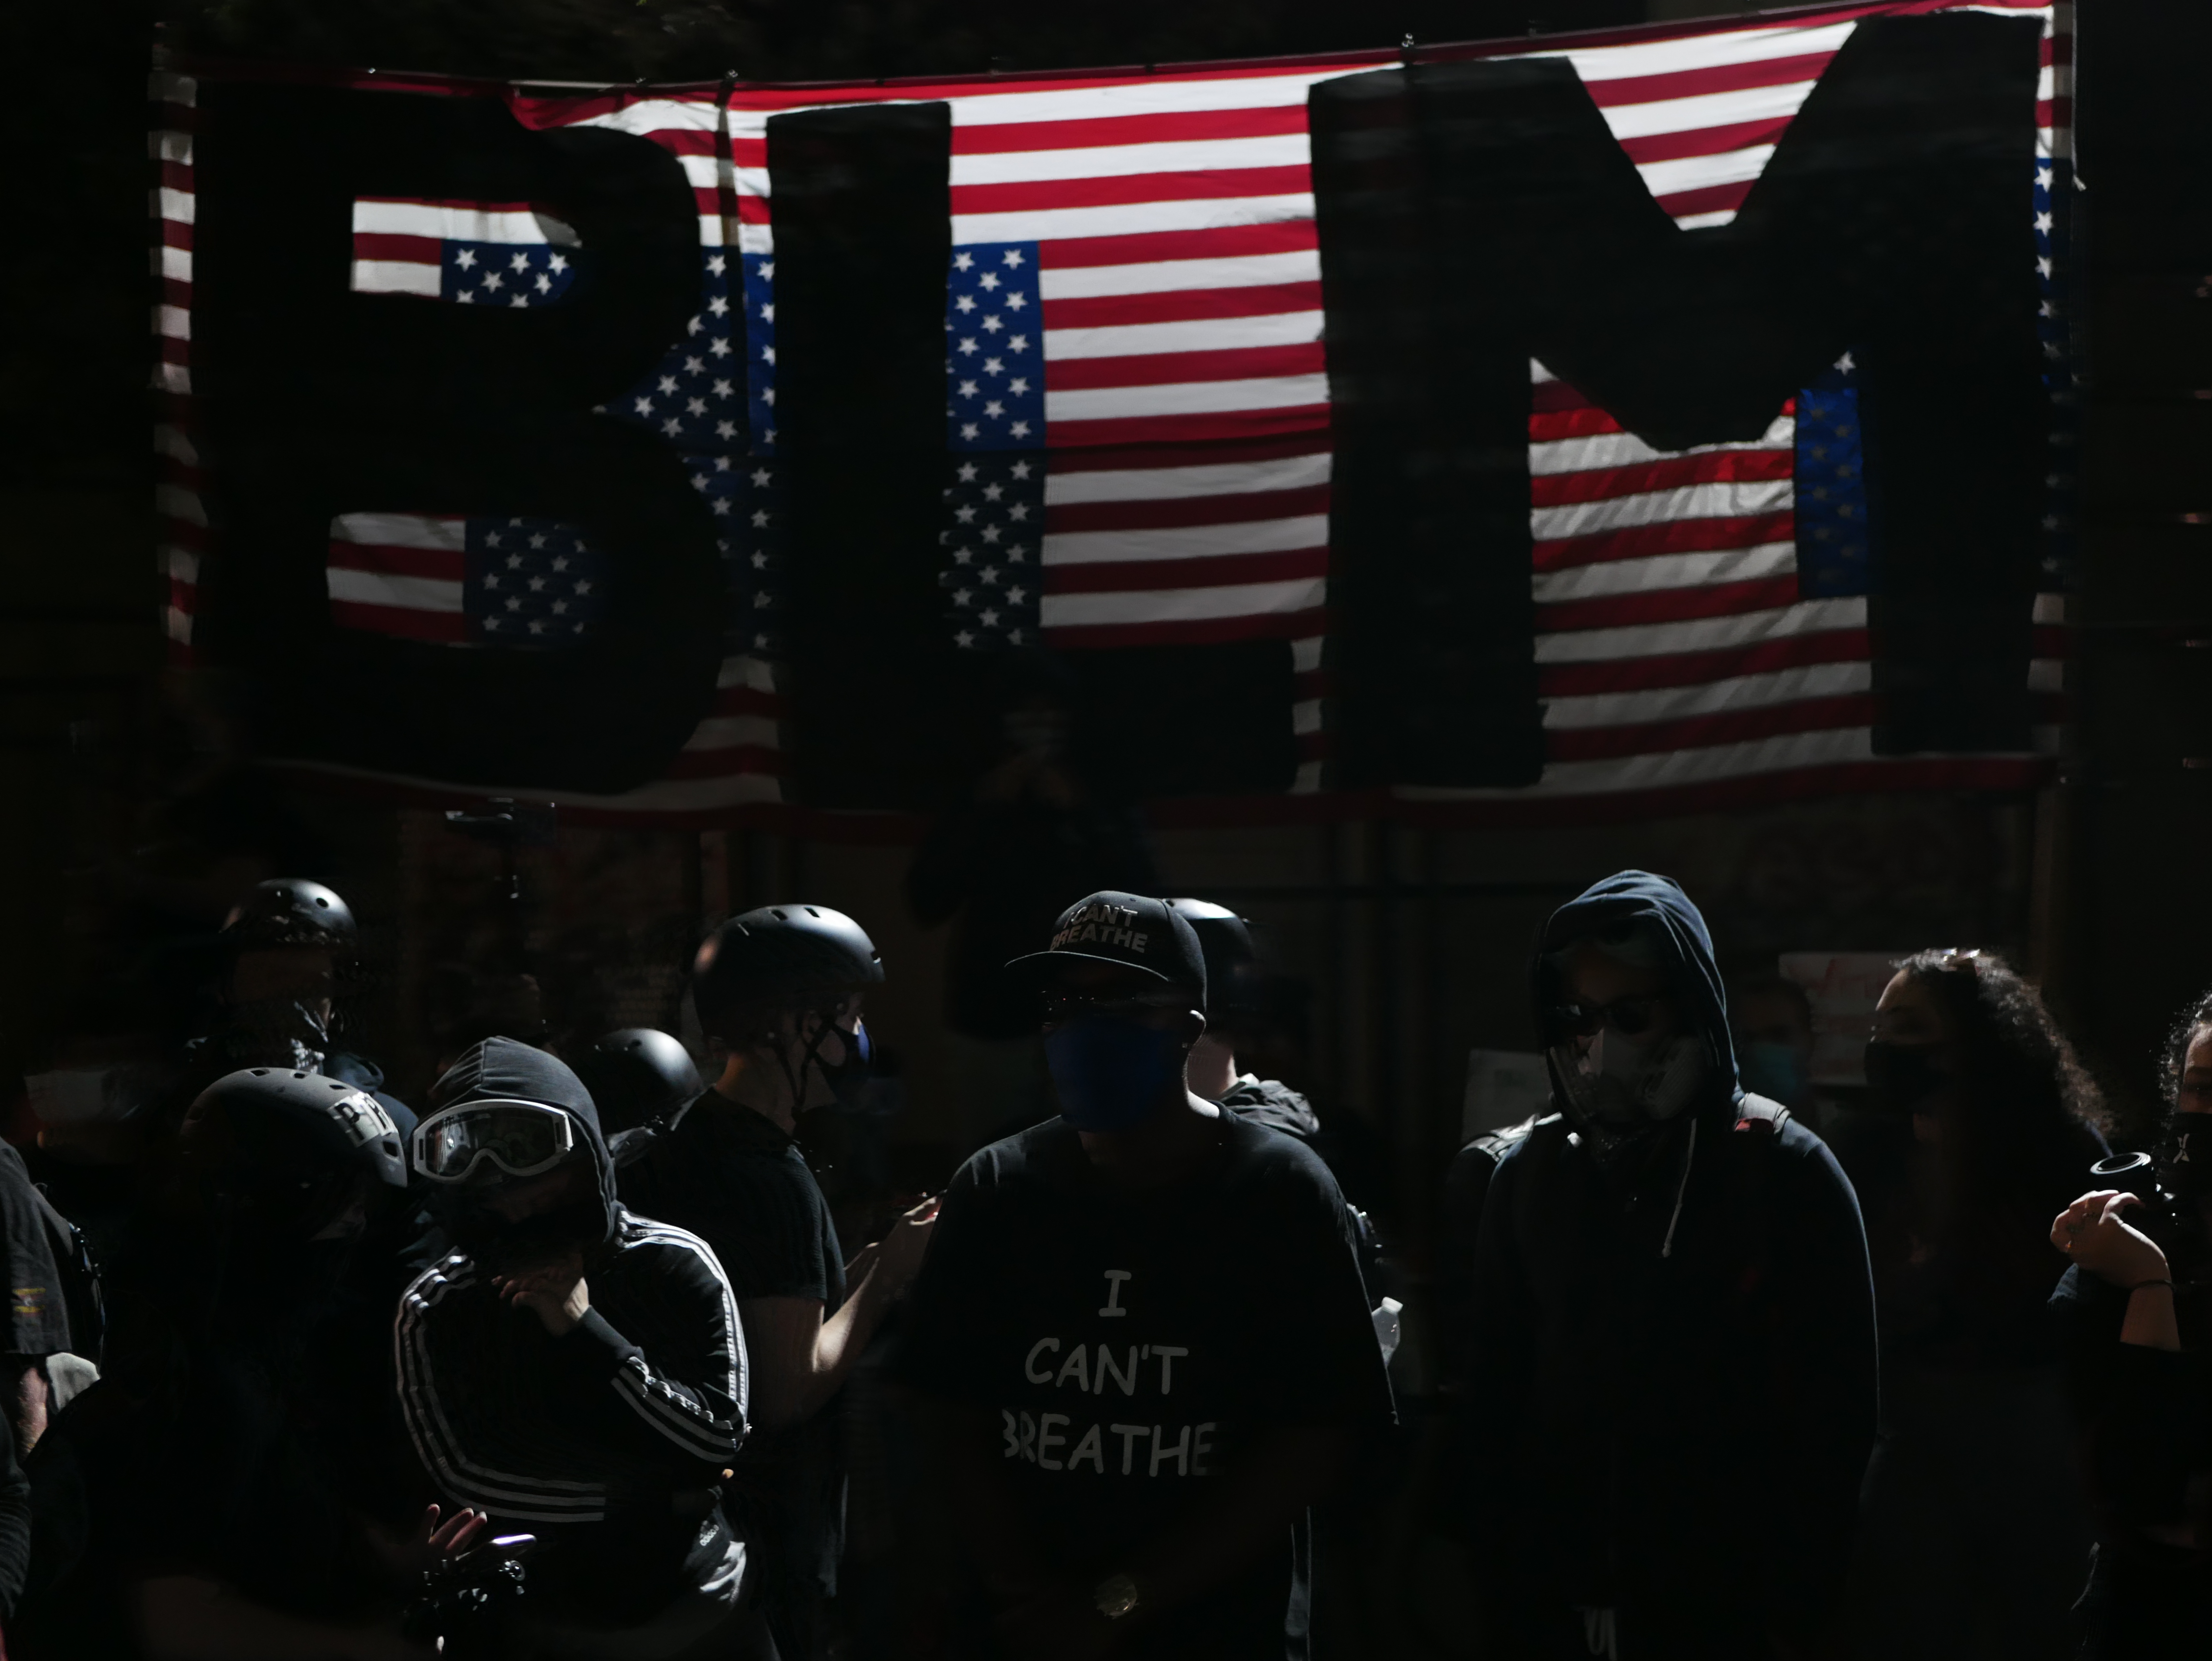 Photograph of protesters in front of an American flag with BLM in black letters written on it.